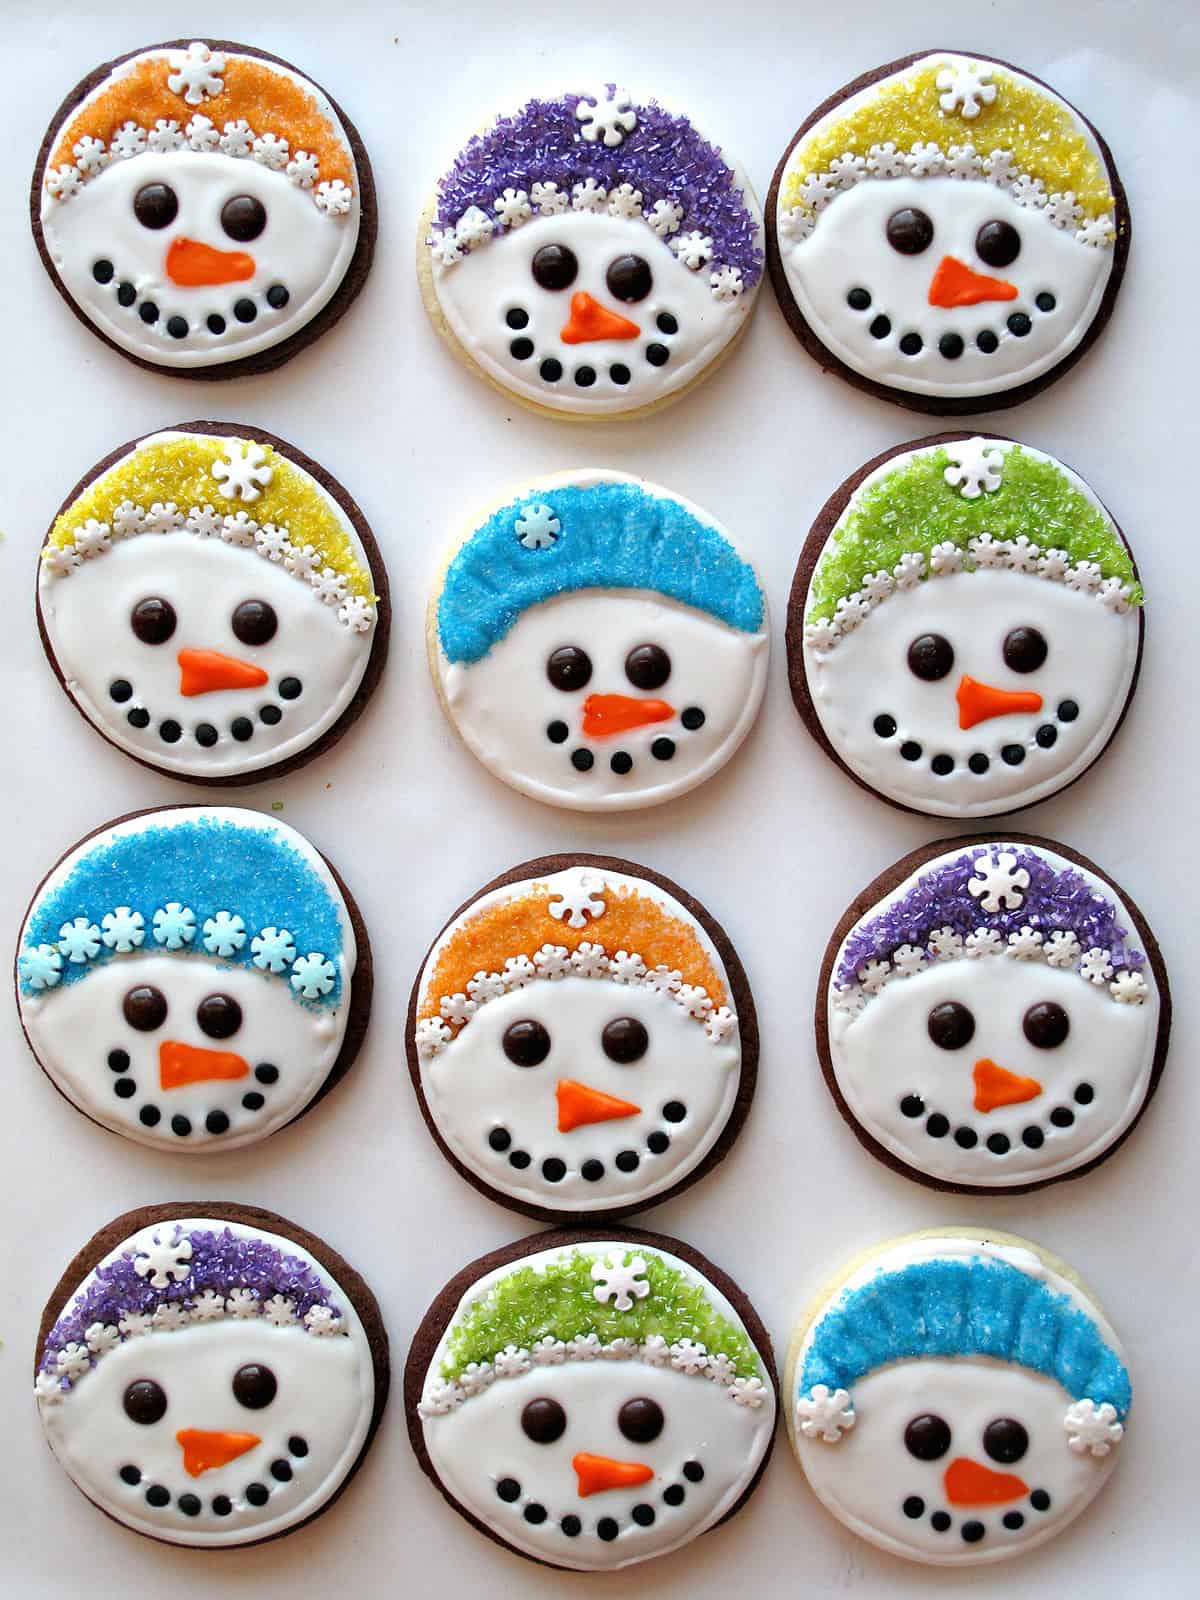 Iced sugar cookies with snowman faces.